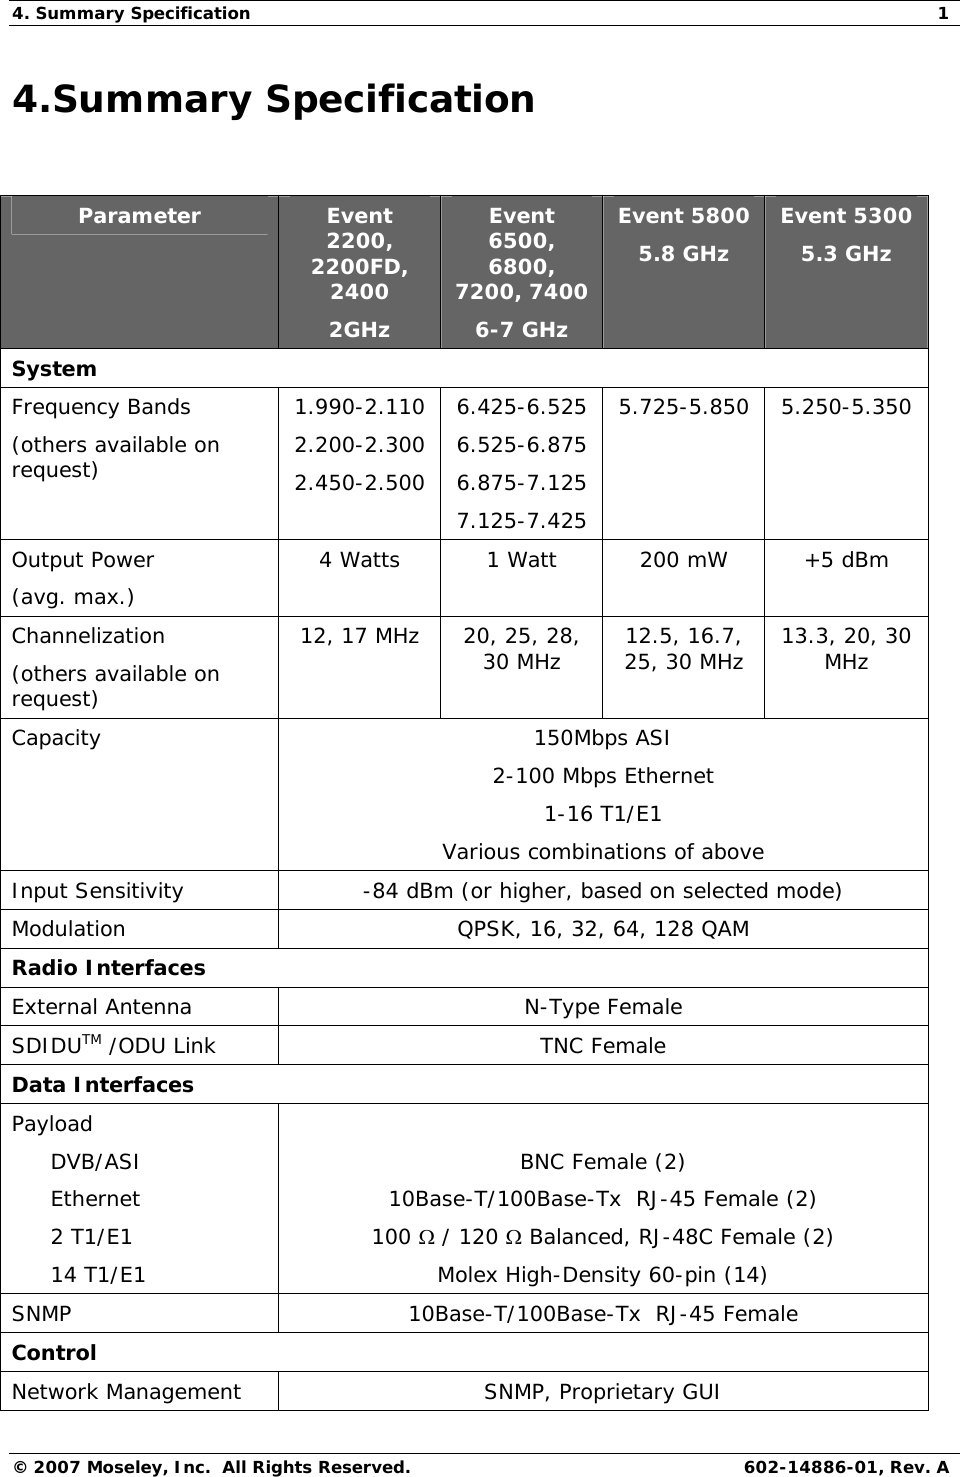 4. Summary Specification  1 © 2007 Moseley, Inc.  All Rights Reserved. 602-14886-01, Rev. A 4.Summary Specification  Parameter  Event 2200, 2200FD, 2400 2GHz Event 6500, 6800, 7200, 7400  6-7 GHz Event 5800 5.8 GHz Event 5300 5.3 GHz System      Frequency Bands (others available on request) 1.990-2.110 2.200-2.300 2.450-2.500 6.425-6.525 6.525-6.875 6.875-7.125 7.125-7.425 5.725-5.850  5.250-5.350 Output Power  (avg. max.) 4 Watts  1 Watt  200 mW  +5 dBm Channelization  (others available on request) 12, 17 MHz  20, 25, 28, 30 MHz  12.5, 16.7, 25, 30 MHz  13.3, 20, 30 MHz Capacity 150Mbps ASI 2-100 Mbps Ethernet 1-16 T1/E1 Various combinations of above Input Sensitivity  -84 dBm (or higher, based on selected mode) Modulation  QPSK, 16, 32, 64, 128 QAM Radio Interfaces     External Antenna  N-Type Female SDIDUTM /ODU Link  TNC Female Data Interfaces     Payload DVB/ASI Ethernet 2 T1/E1 14 T1/E1  BNC Female (2) 10Base-T/100Base-Tx  RJ-45 Female (2) 100 Ω / 120 Ω Balanced, RJ-48C Female (2) Molex High-Density 60-pin (14) SNMP  10Base-T/100Base-Tx  RJ-45 Female Control      Network Management  SNMP, Proprietary GUI  